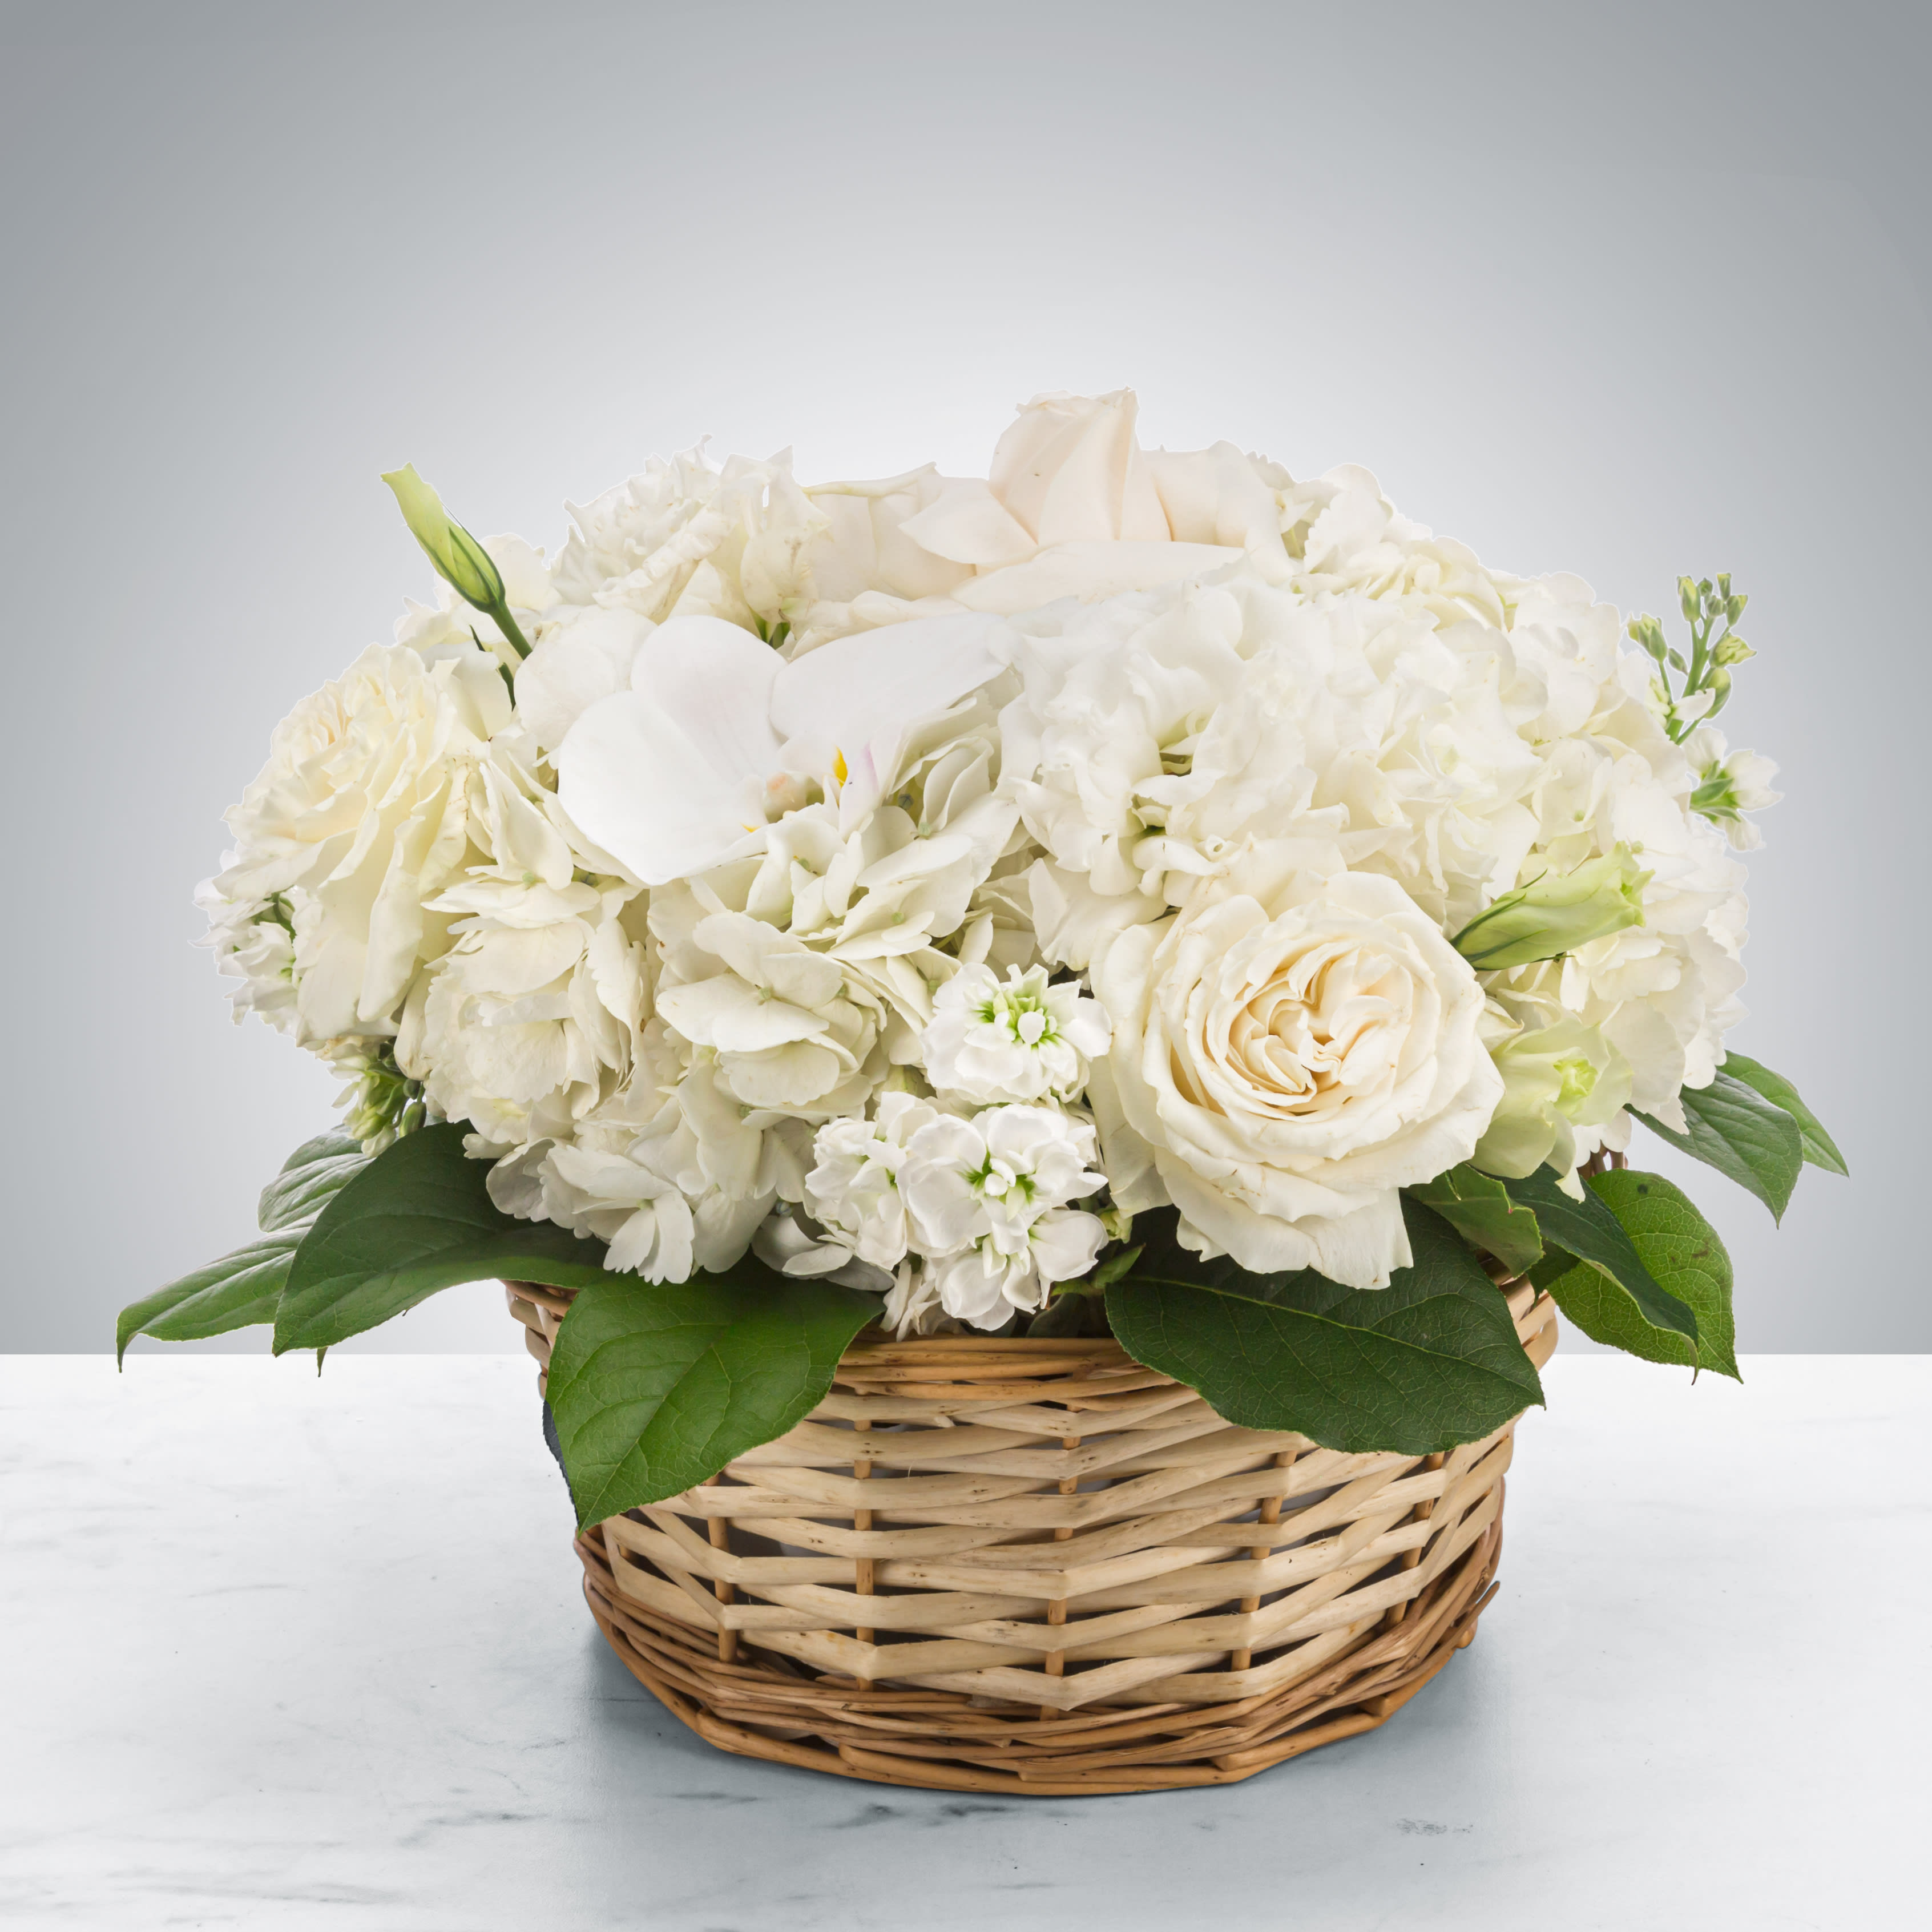 Lace by BloomNation™ - Send this all-white arrangement to the family's home to let them know you are thinking of them in their time of loss. Featuring white hydrangea, white orchids and roses this pure white arrangement is a classic sympathy arrangement.   Approximate Dimensions: 11&quot;D x 11&quot;H